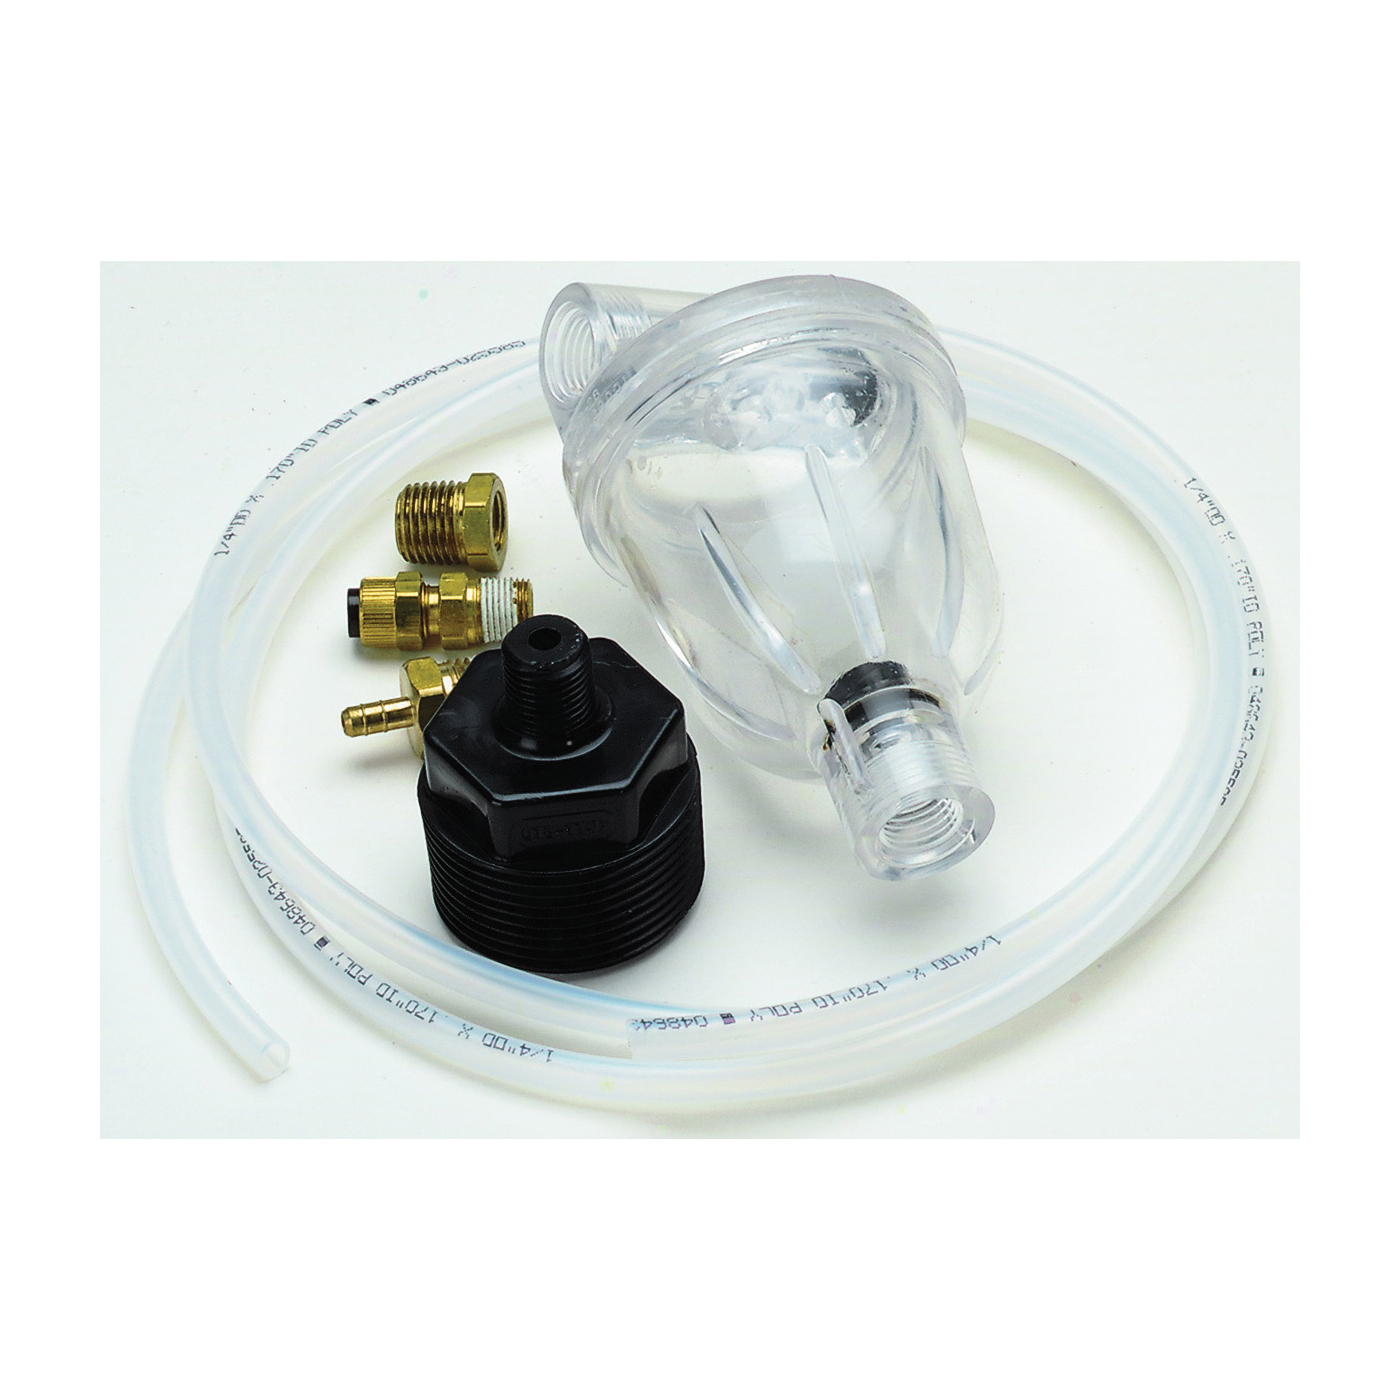 U238-5B Air Volume Control Kit, Thermoplastic, For: Sta-Rite Jet Pumps, Well Systems